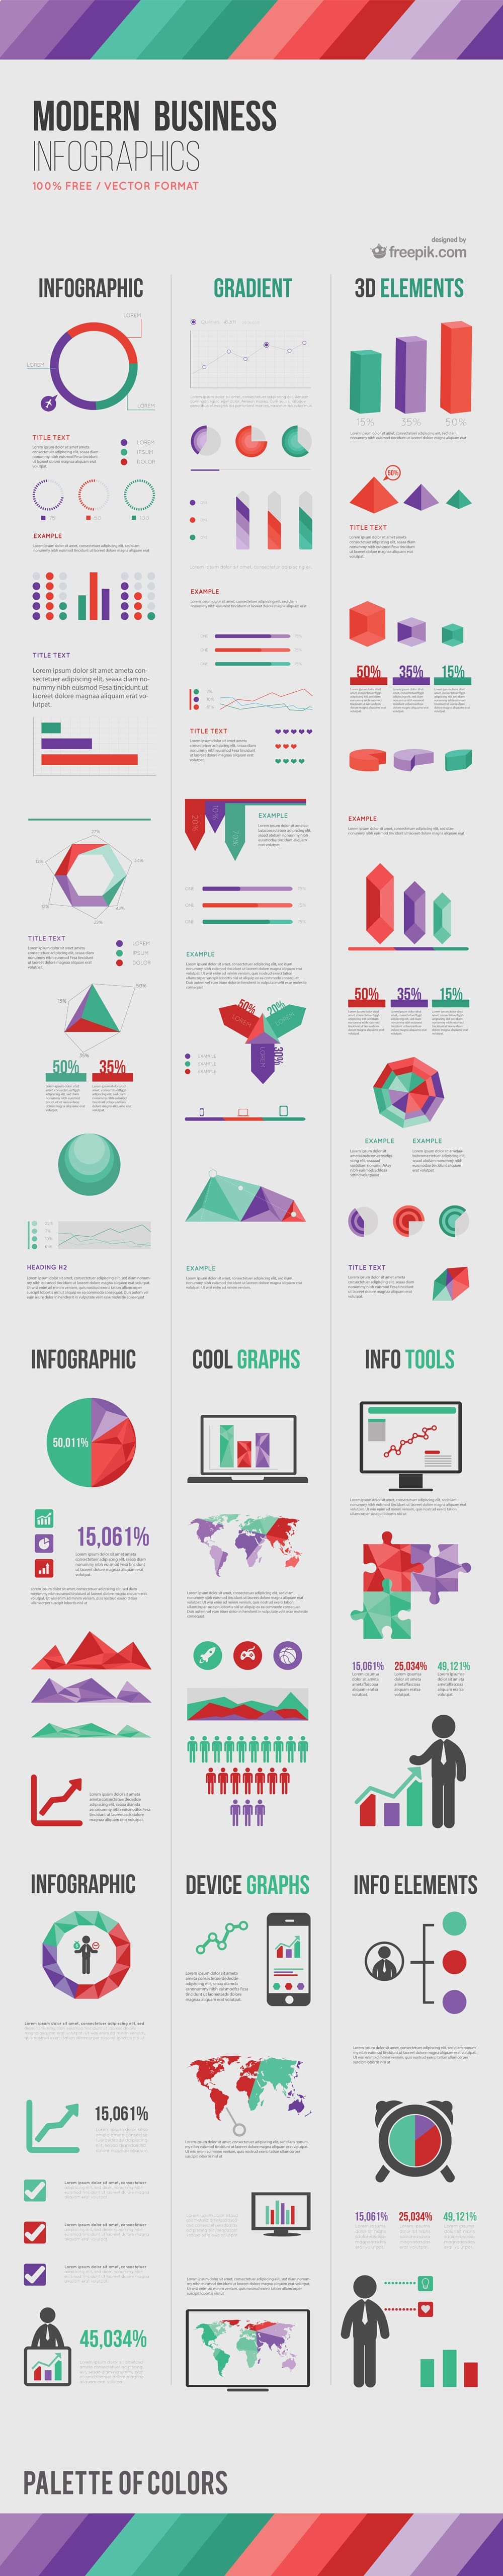 Modern Business Infographic Elements